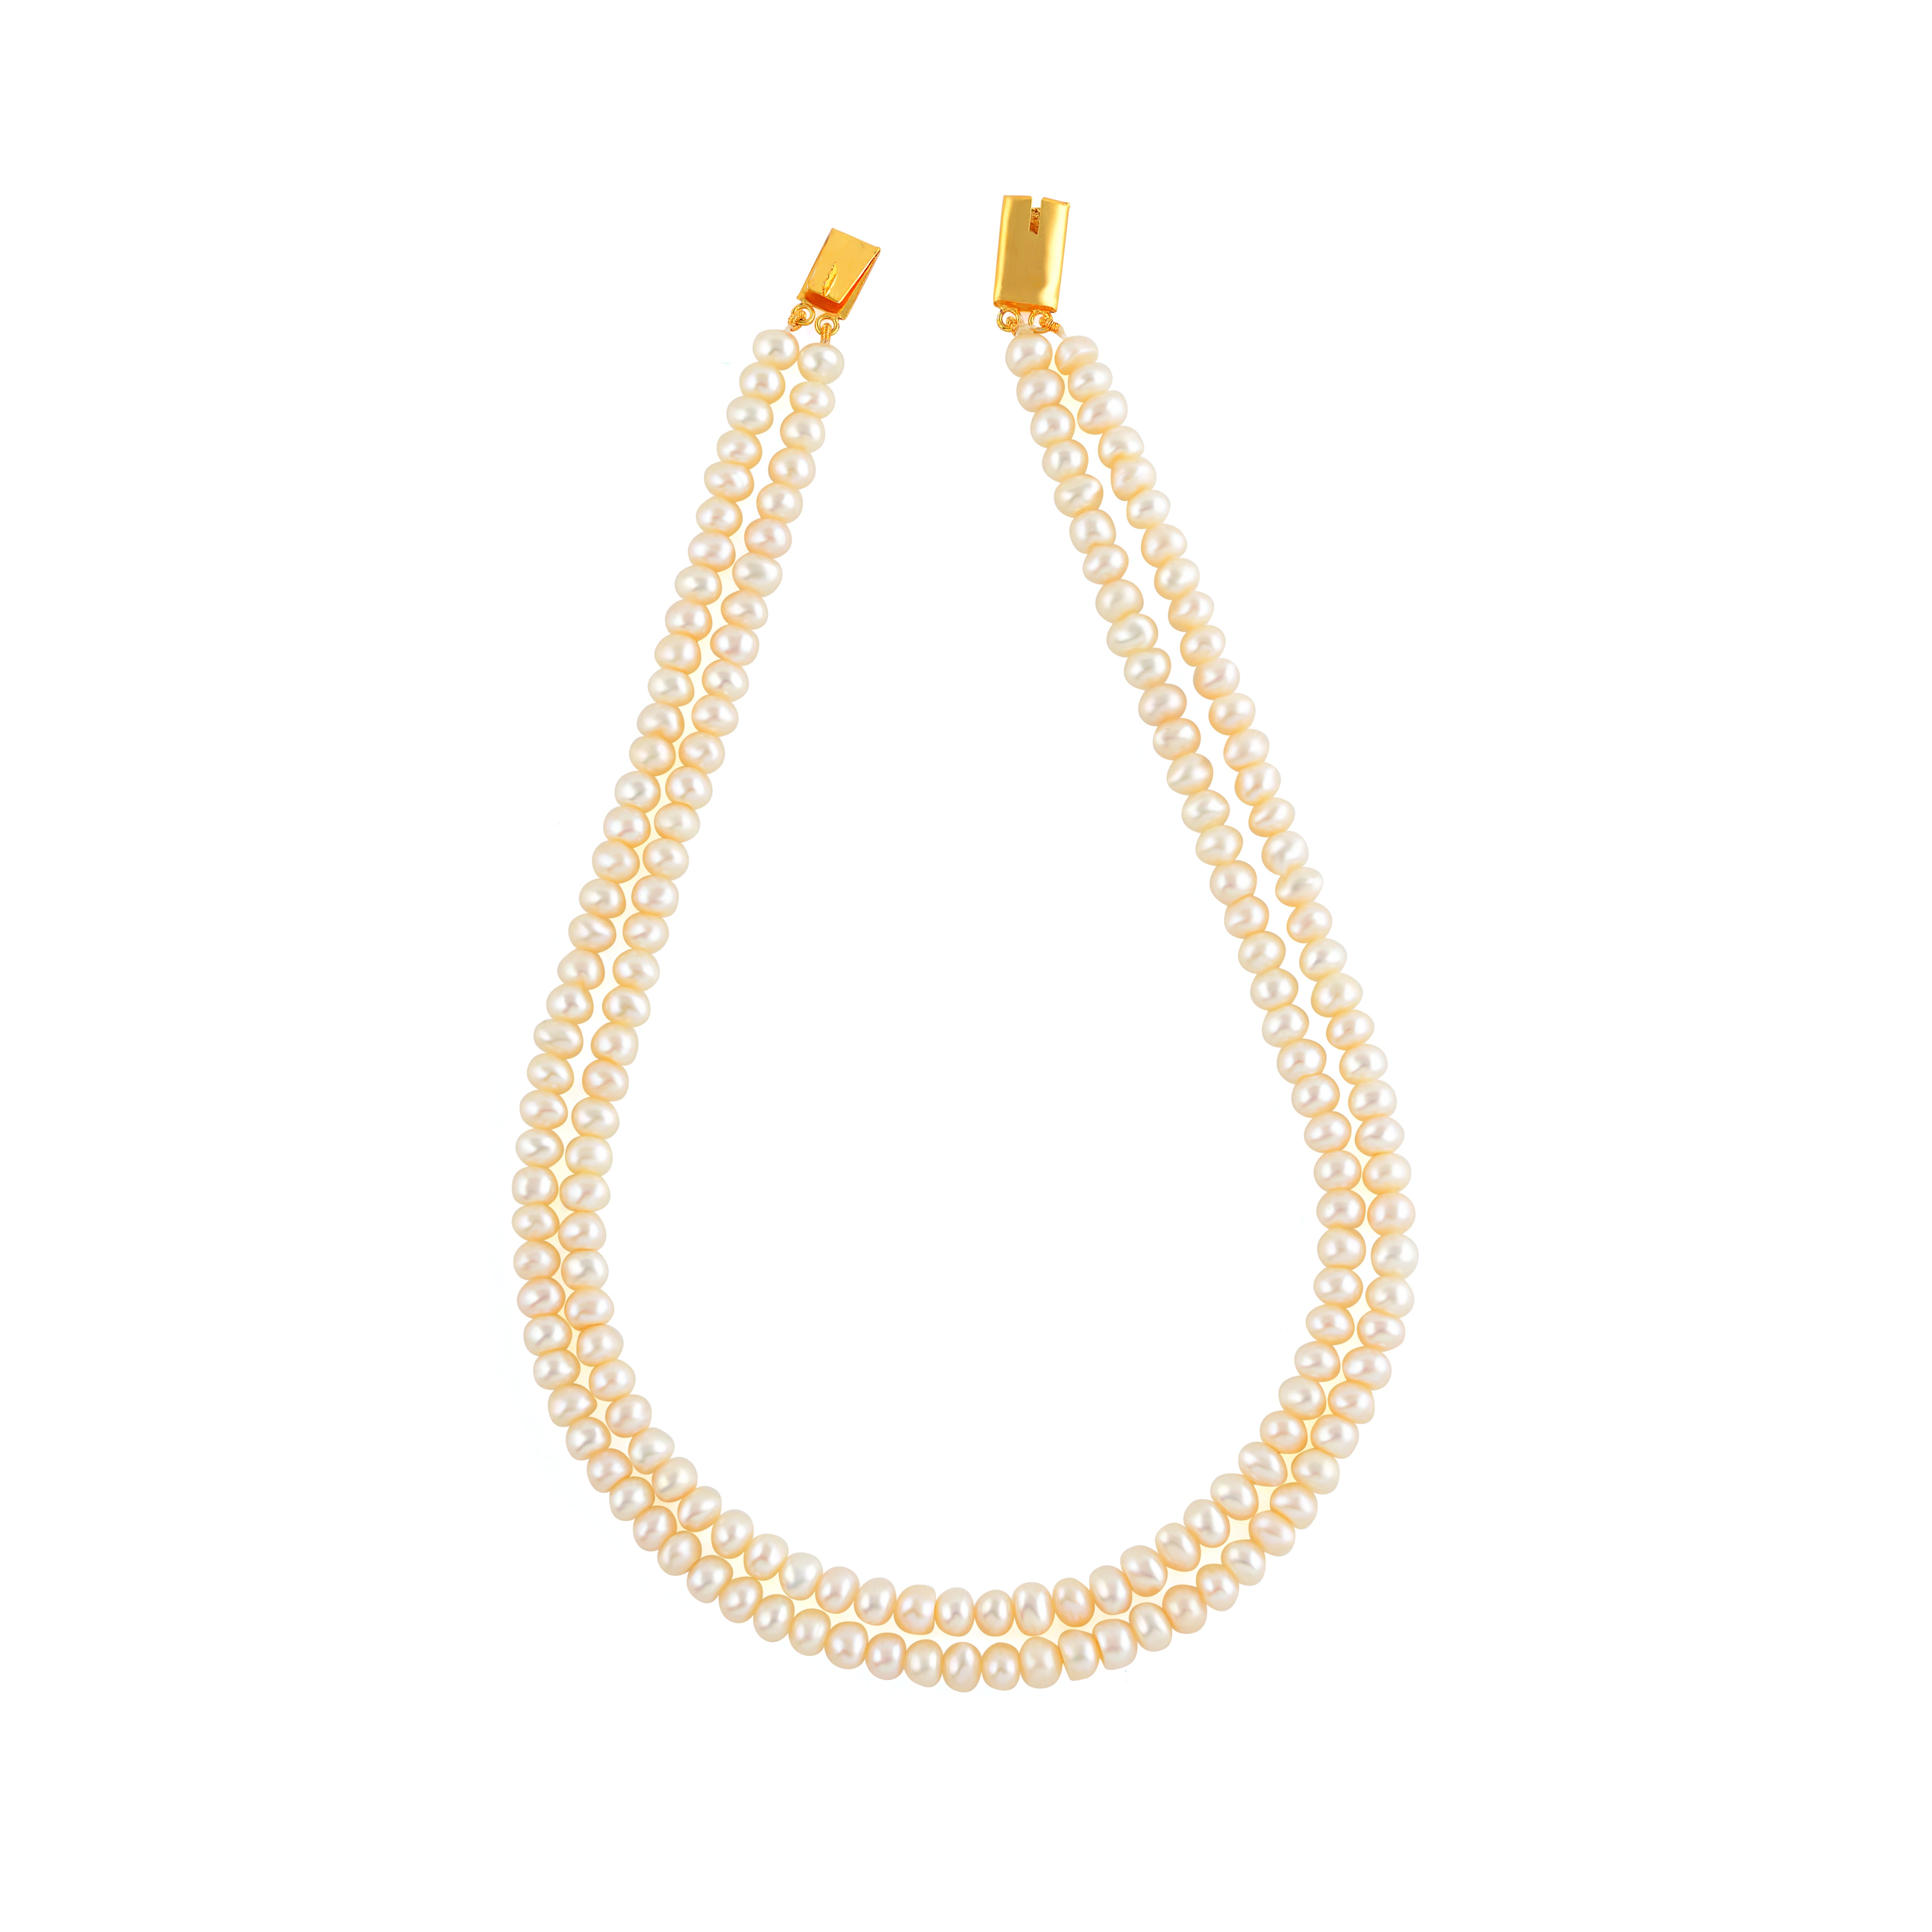 Freshwater White Pearl Necklace, Double Strand